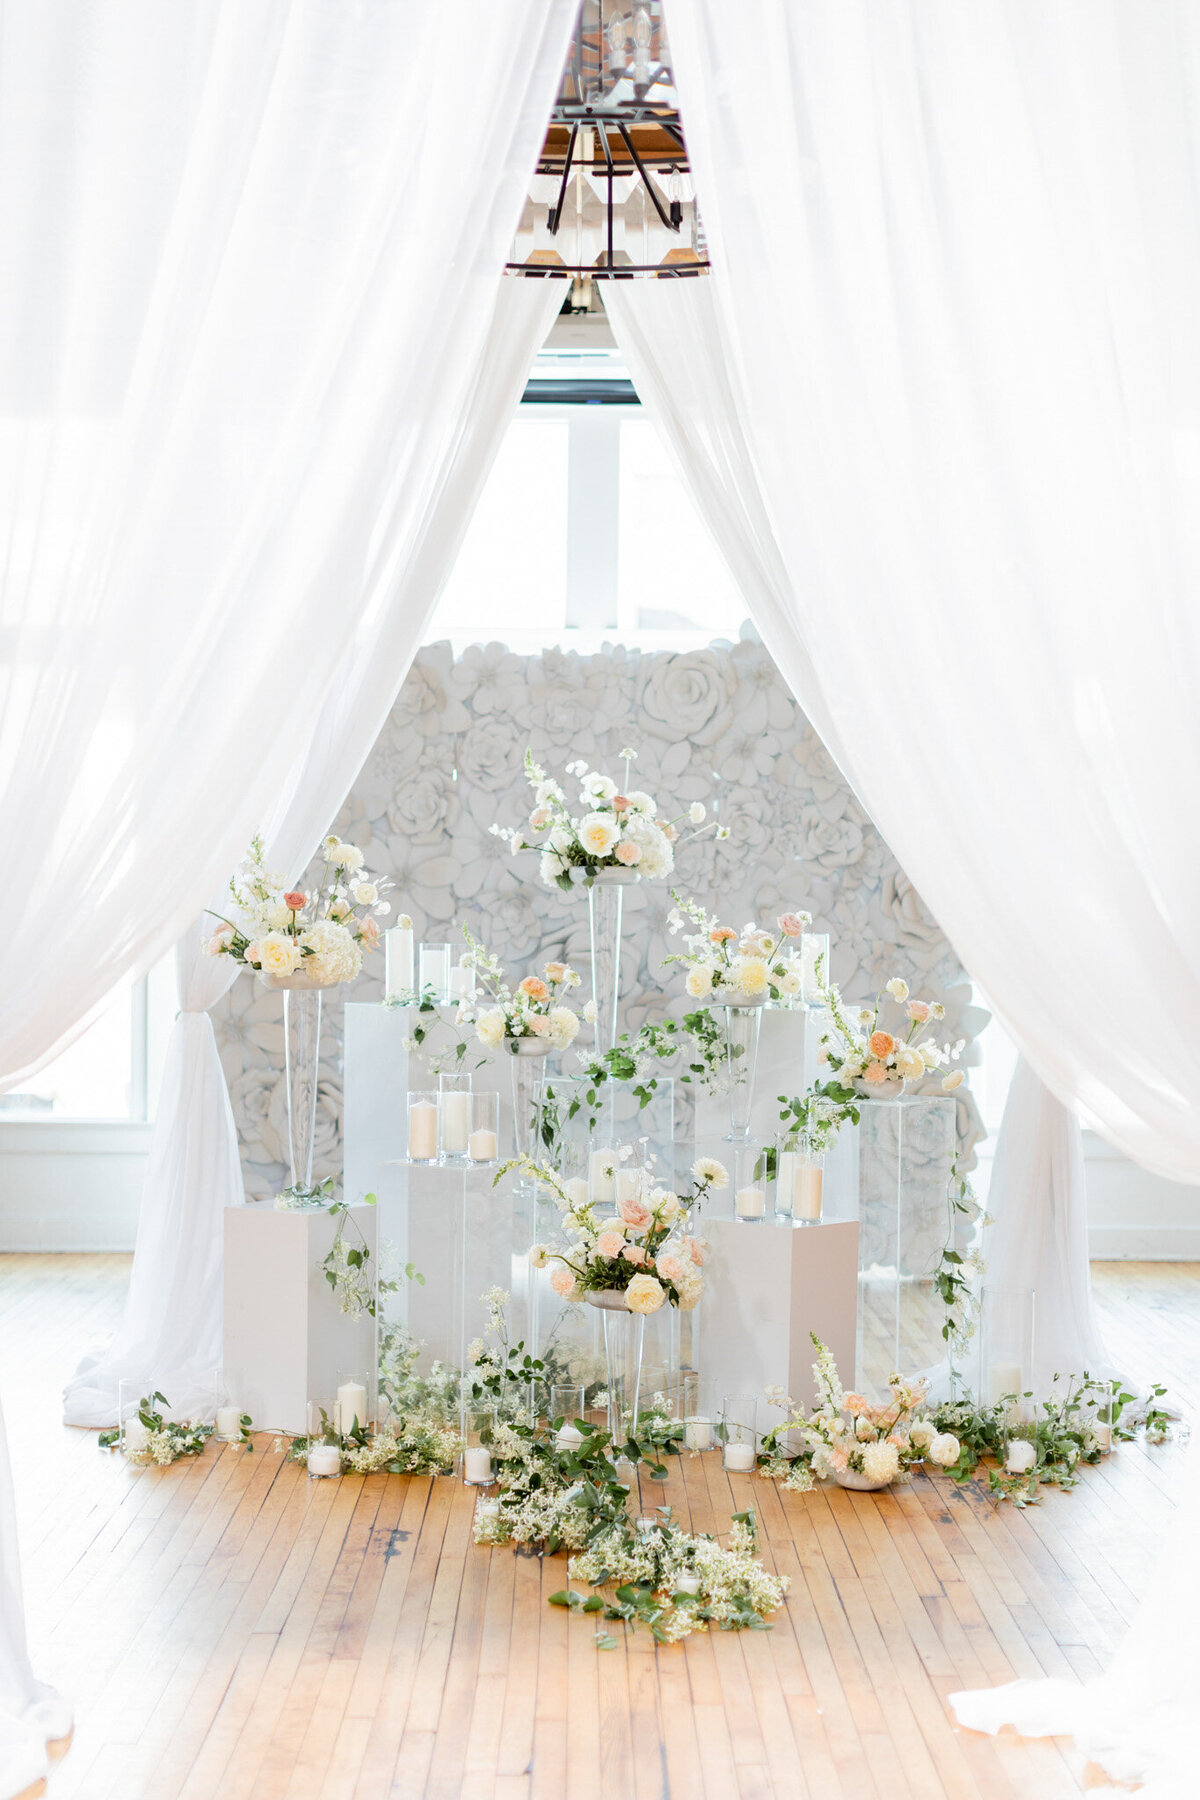 A wedding ceremony with white drapes and flowers.